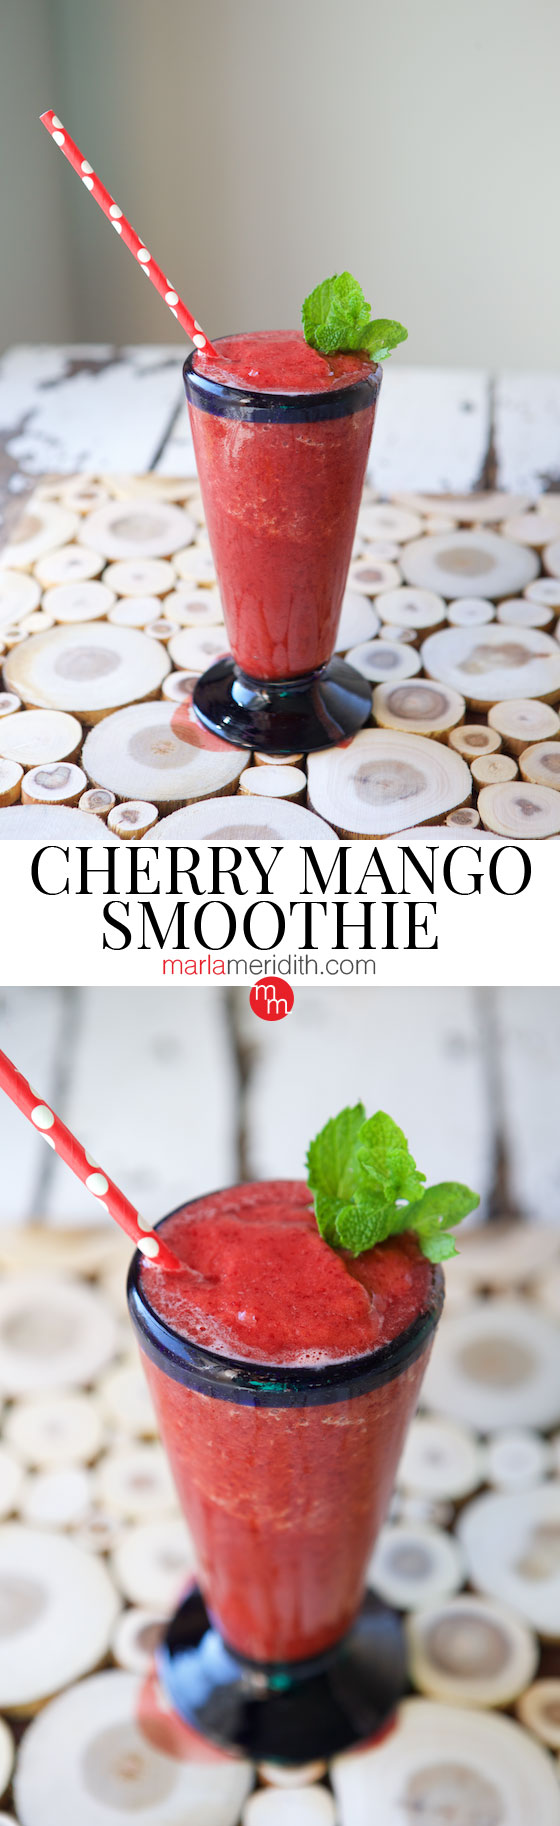 This Cherry Mango Smoothie recipe is the perfect summer refresher! MarlaMeridith.com ( @marlameridith )